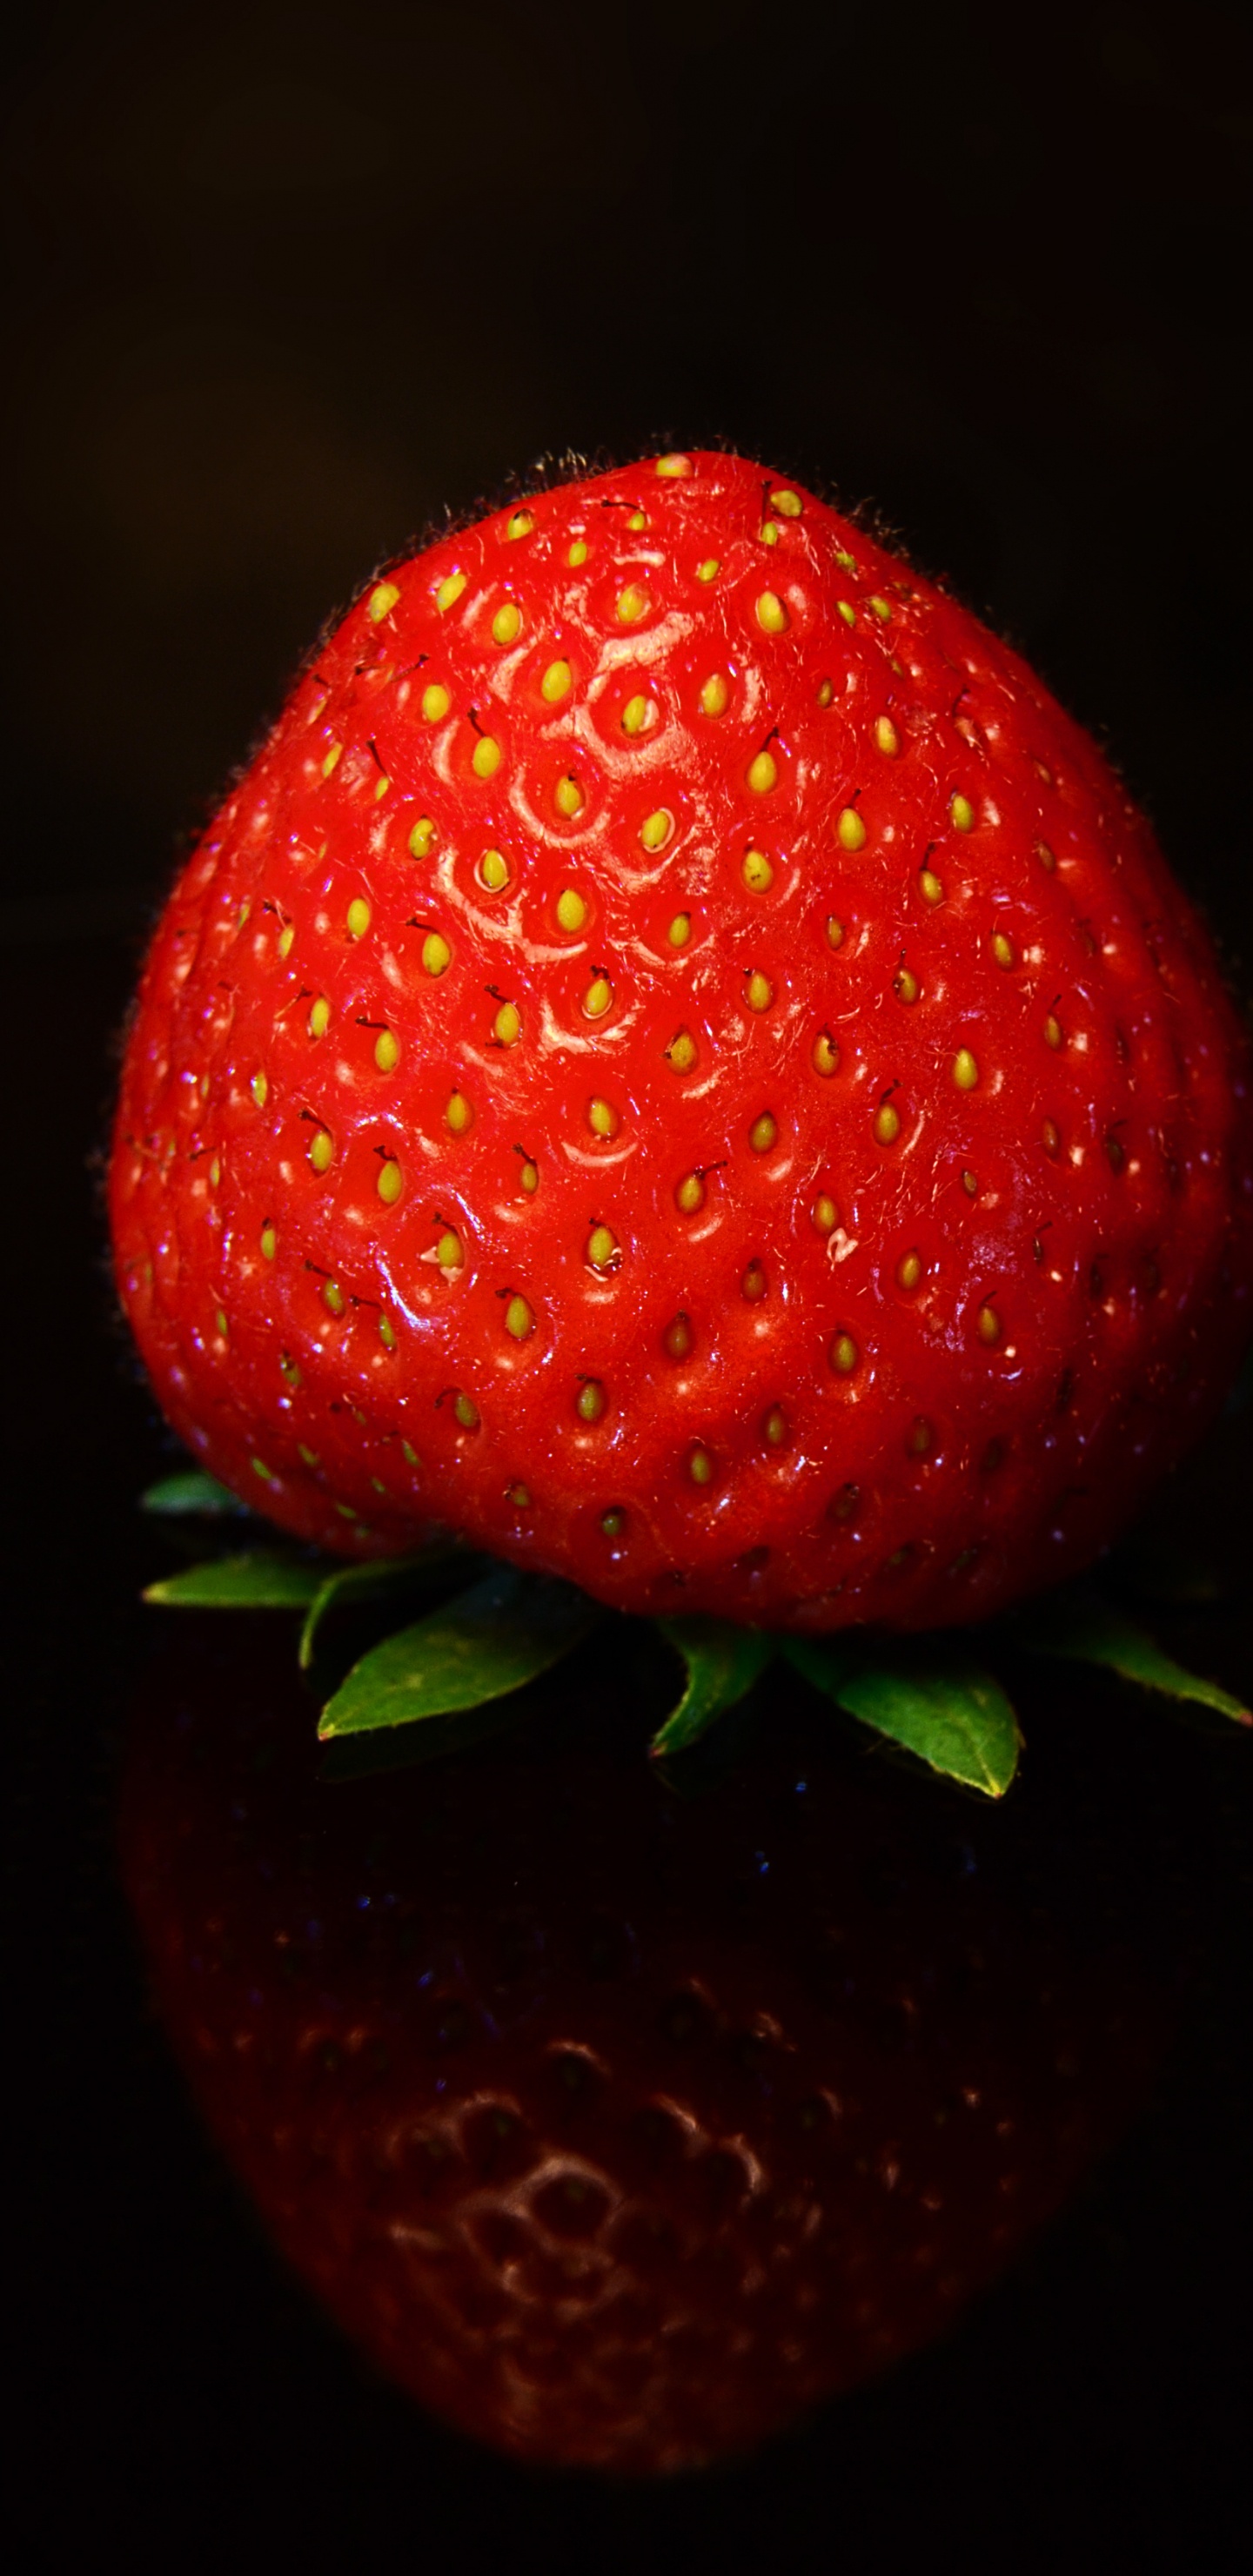 Red Strawberry Fruit in Close up Photography. Wallpaper in 1440x2960 Resolution